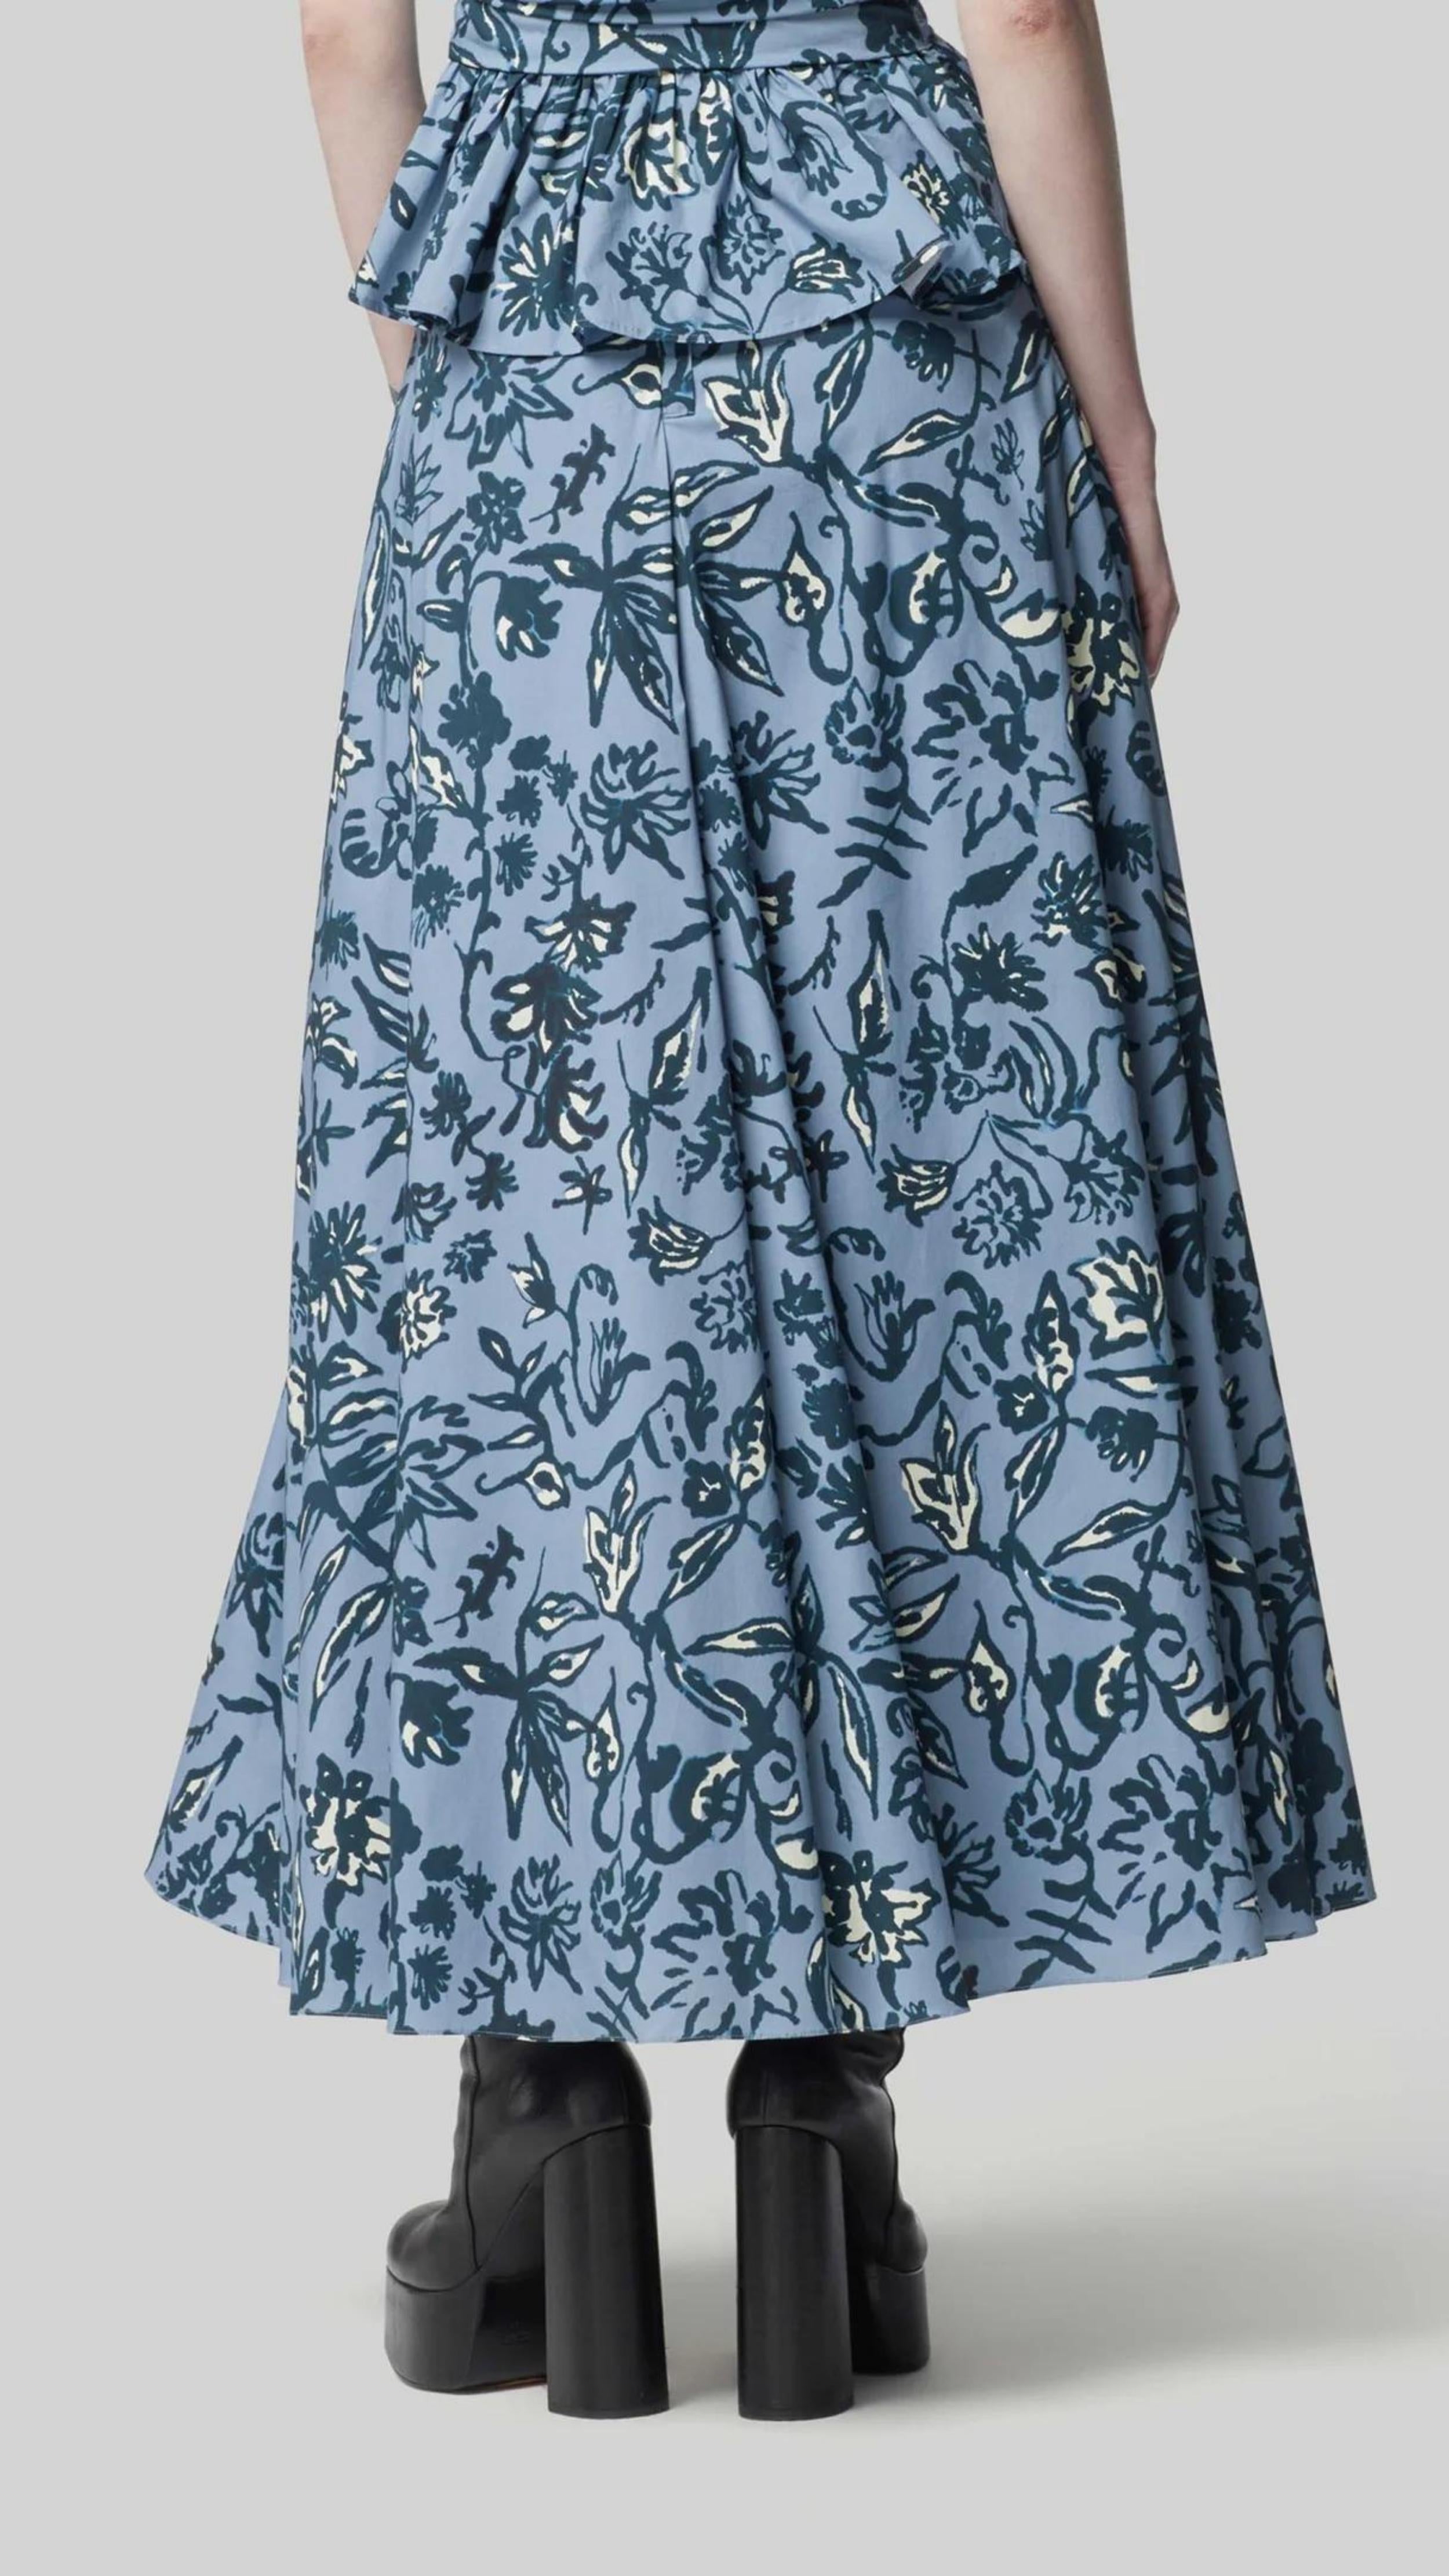 Altuzarra Pythia Skirt in Amsonia Shibori Flower. A midi length, aline style skirt with beautiful twist detail at the waist. Crafted in 100% cotton with a natural ecru color floral print over a light blue background. Shown on model facing back. Available at experience 27 in Madrid spain.